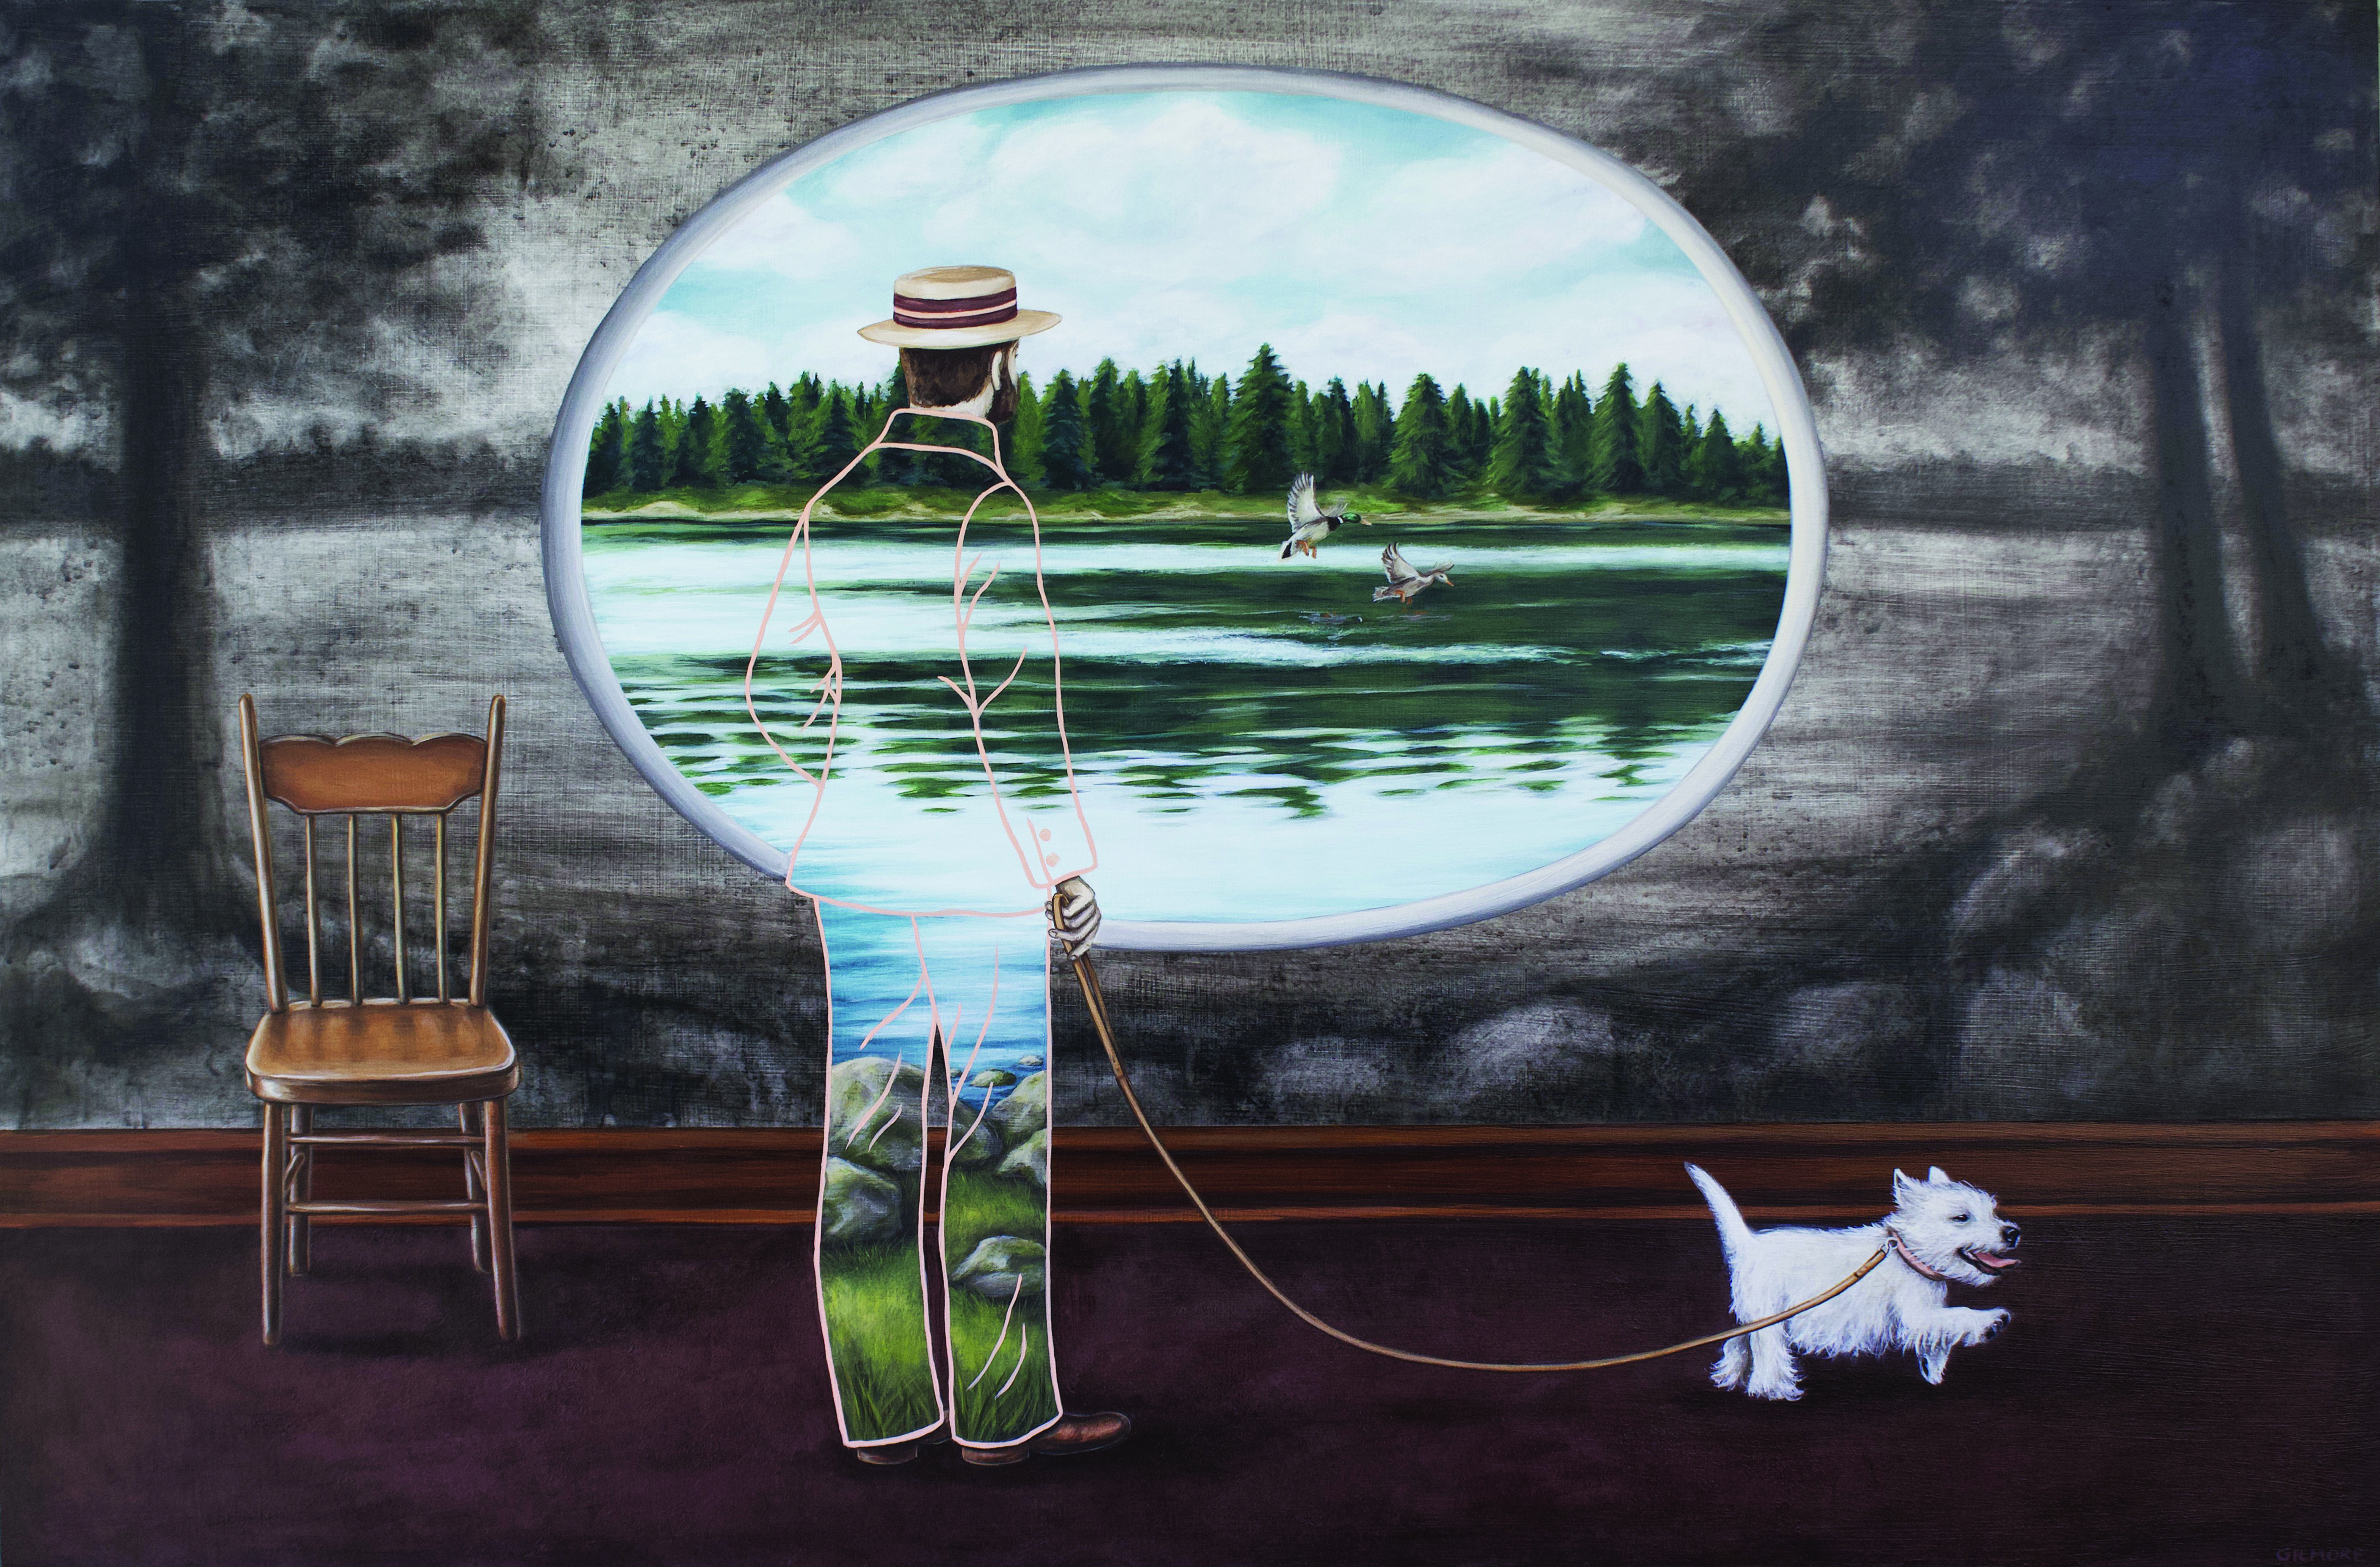 Person in a straw hat and suit walking a dog in a room with a gray landscape painted on the wall. There is a portal & transparent portion of the man that show the landscape in full color. Shawna Gilmore, "Nicholas Needs A Moment"